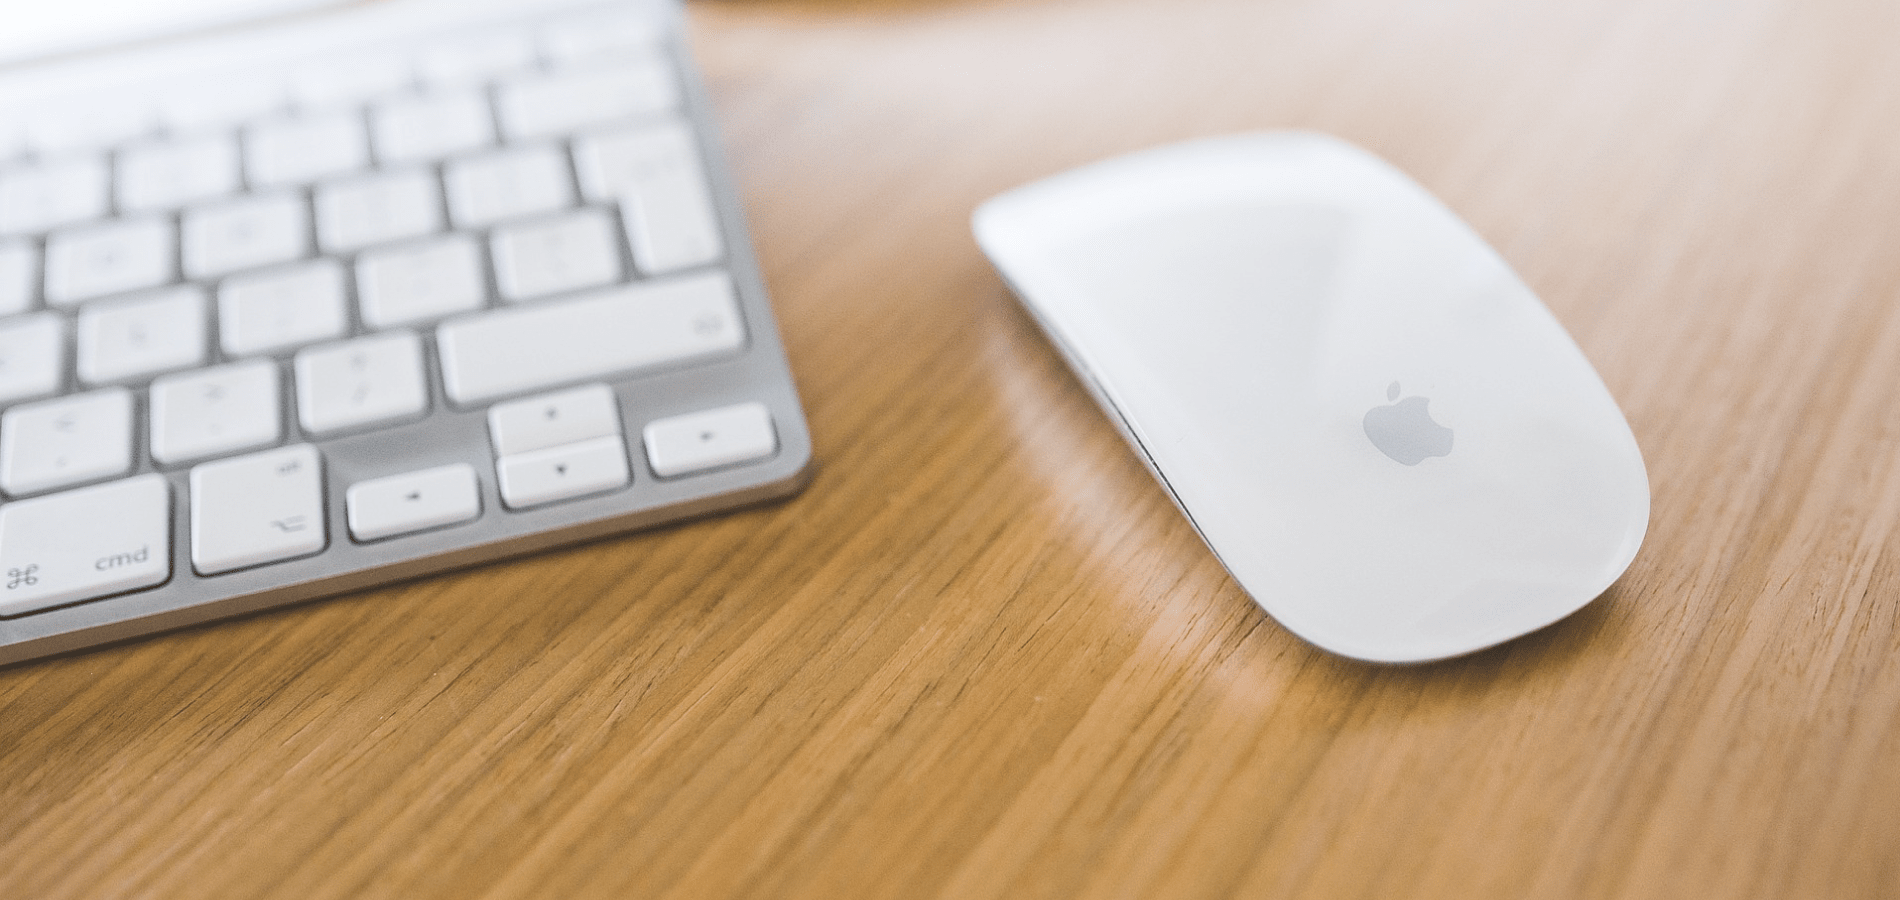 Apple mouse and keyboard